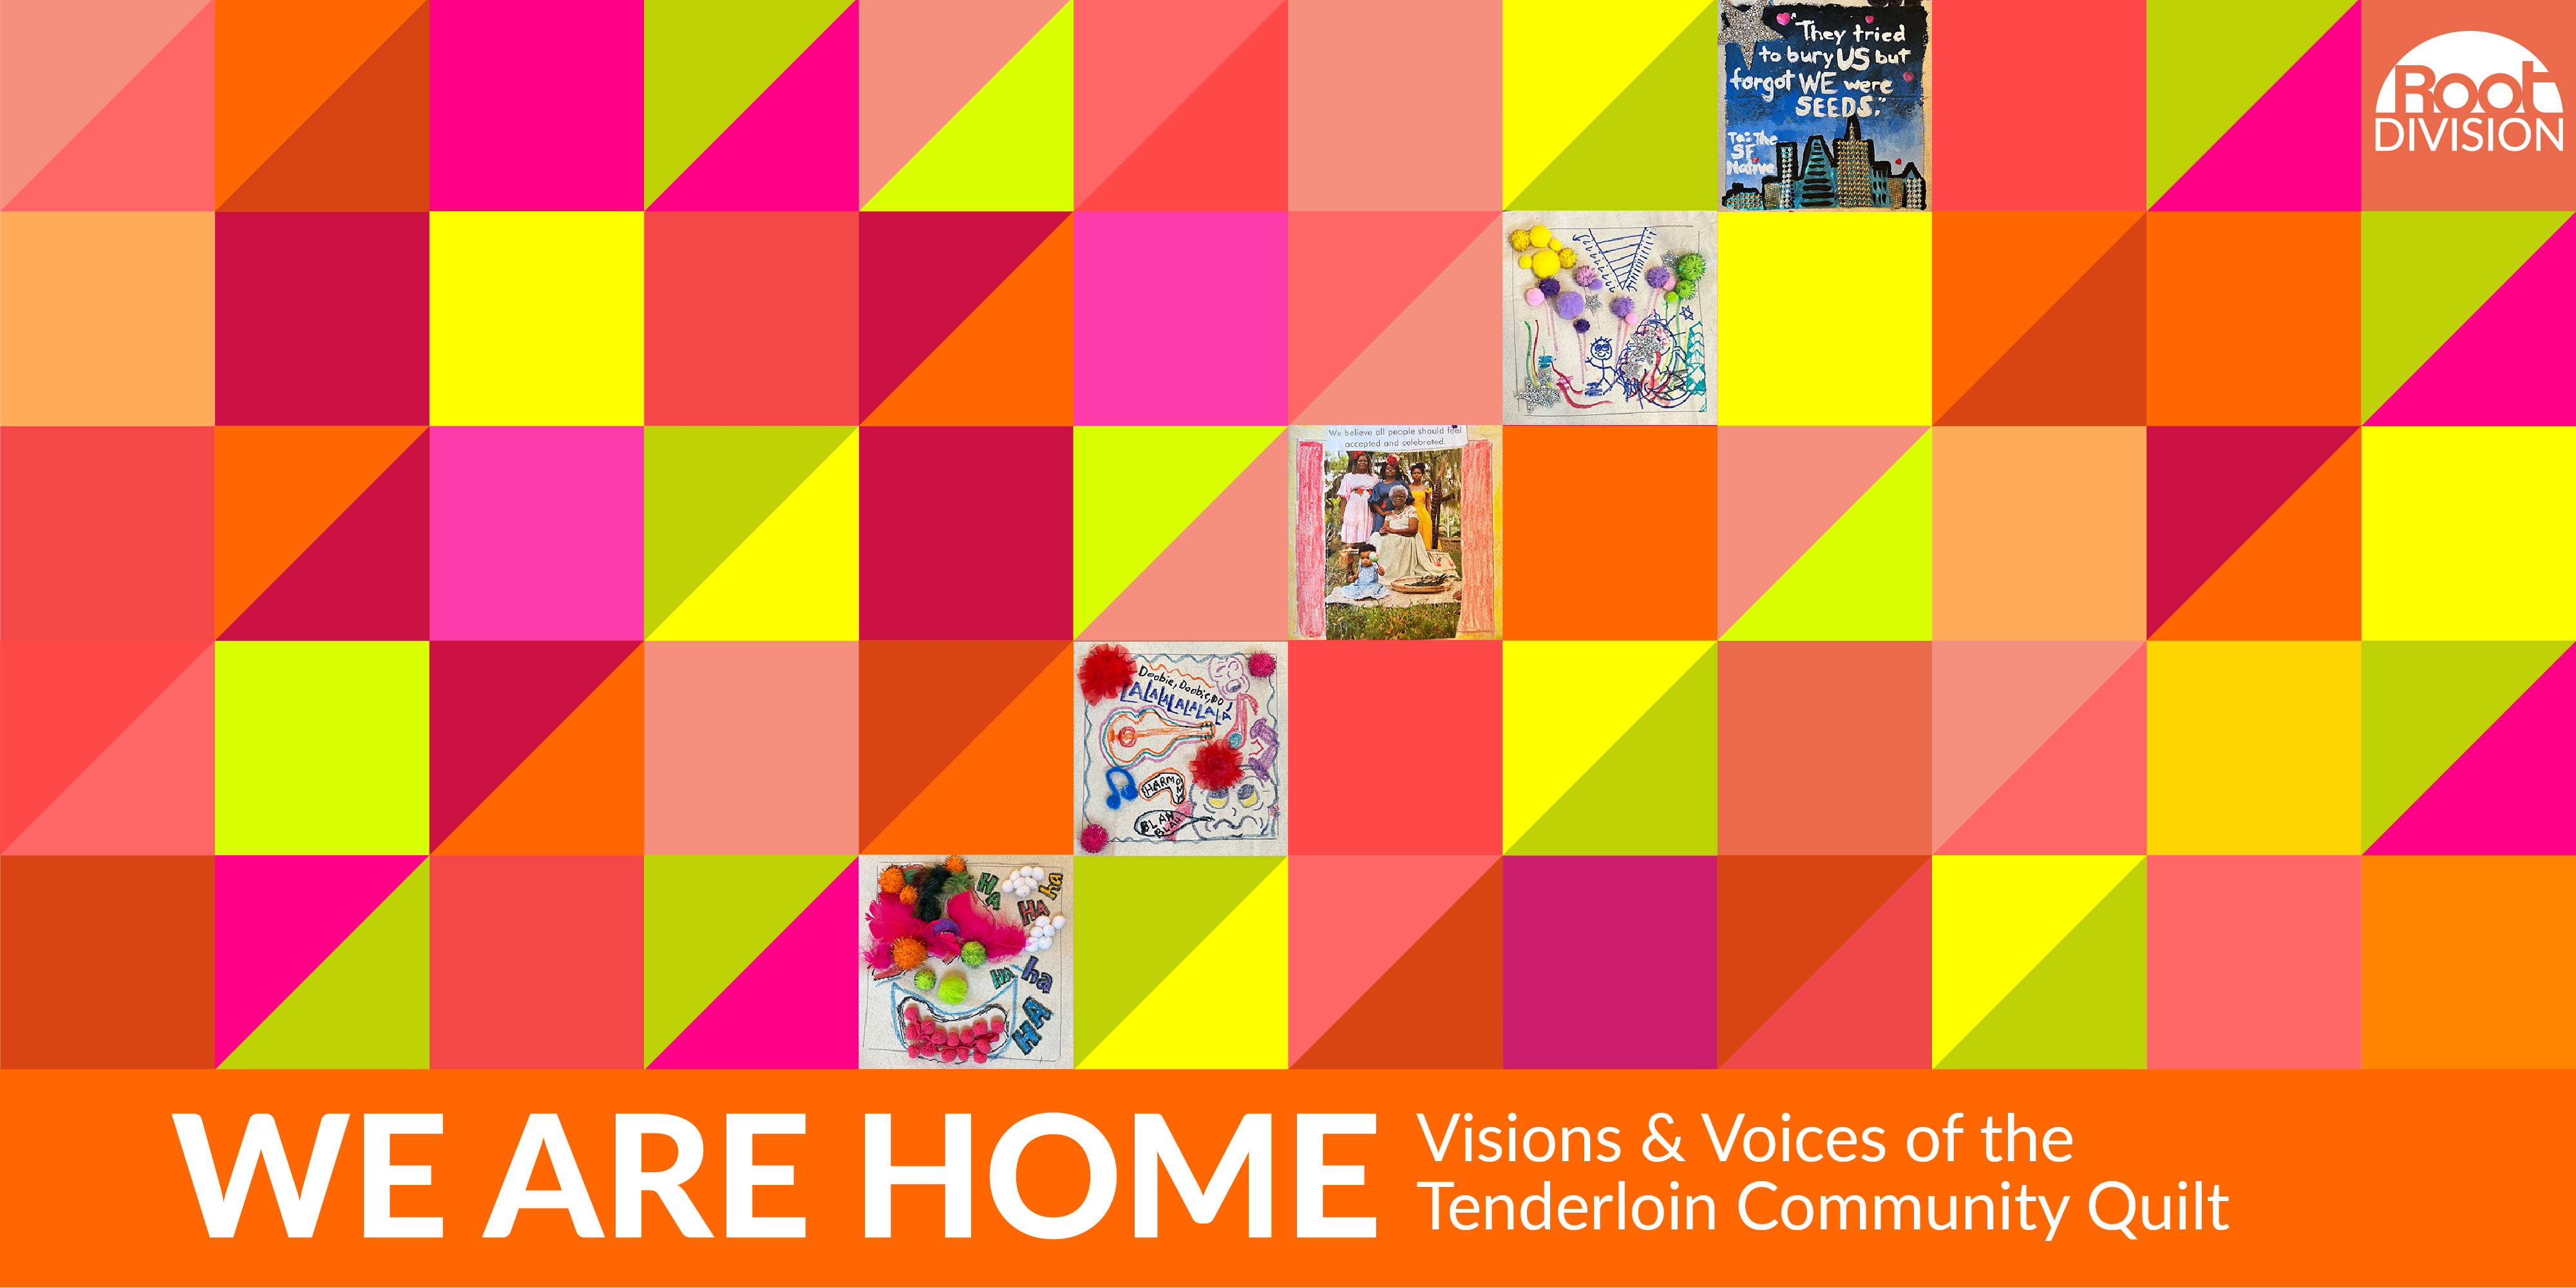 We Are Home: Visions & Voices of the Tenderloin Community Quilt